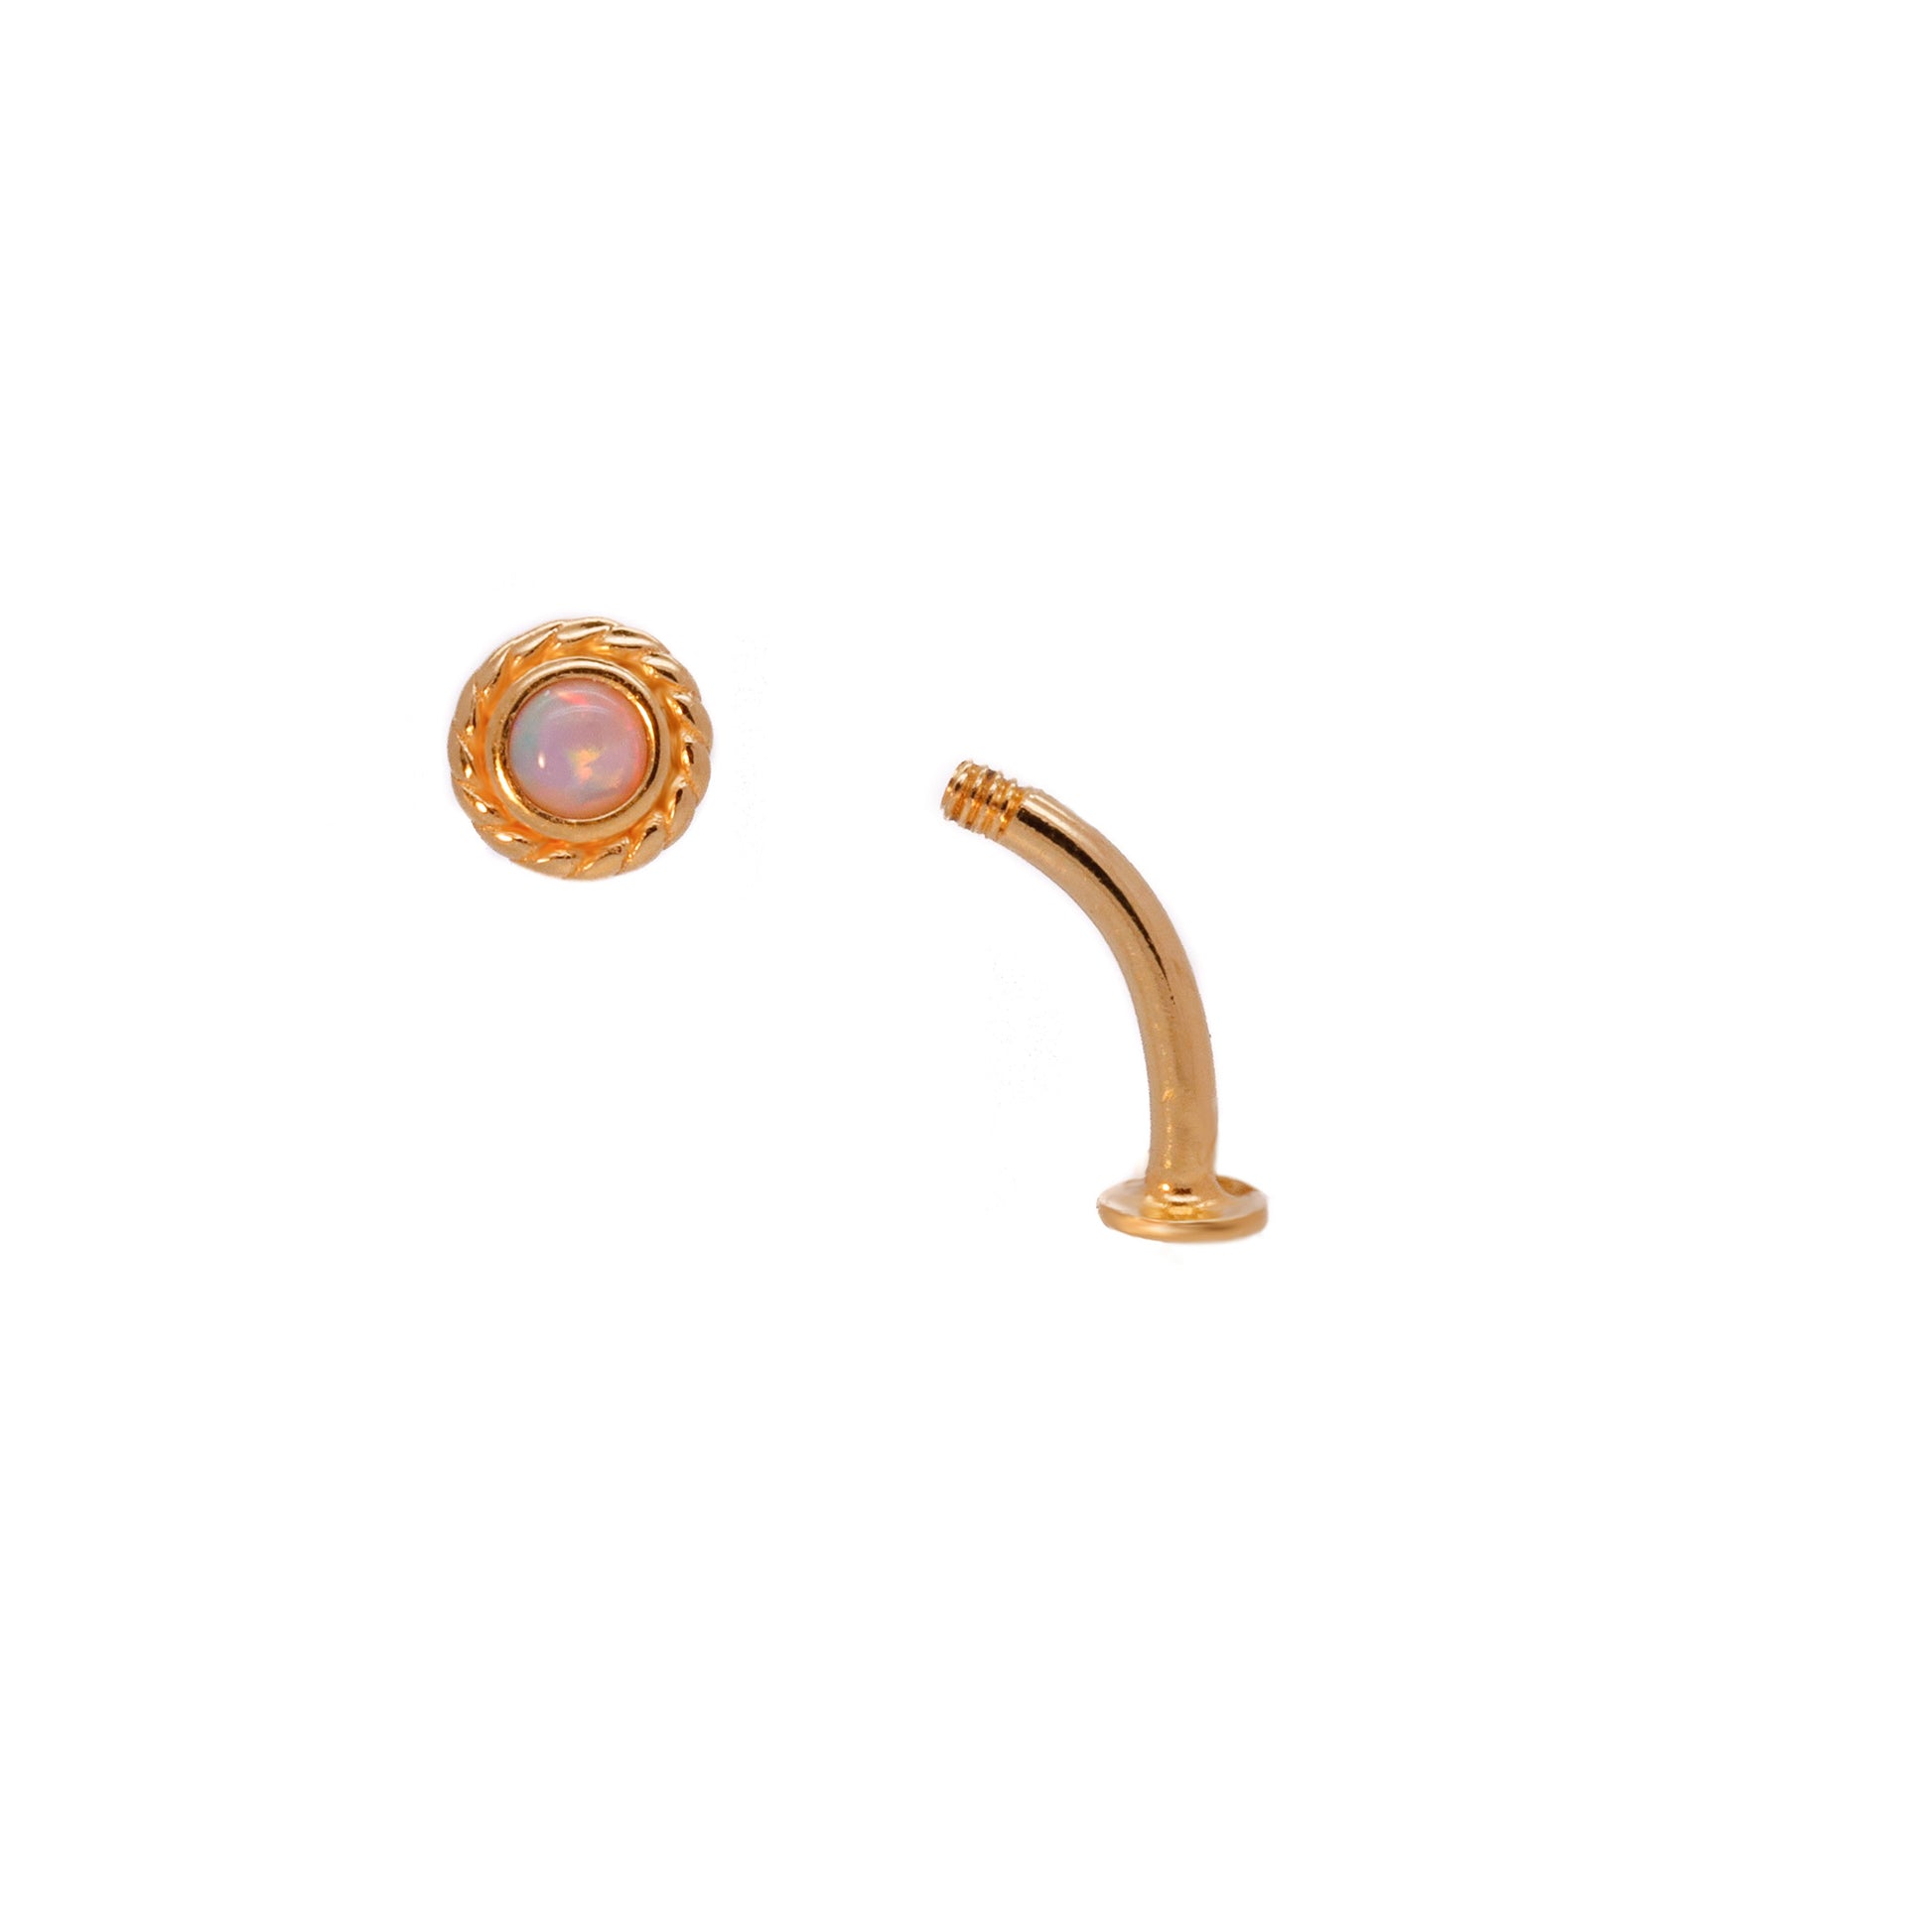 Vermeil | 24k Gold Coated 925 Silver 14G Petite Sun Pink Opal Floating Belly Ring | 6mm 1/4" 8mm 5/16" 10mm 3/8" - Sturdy South